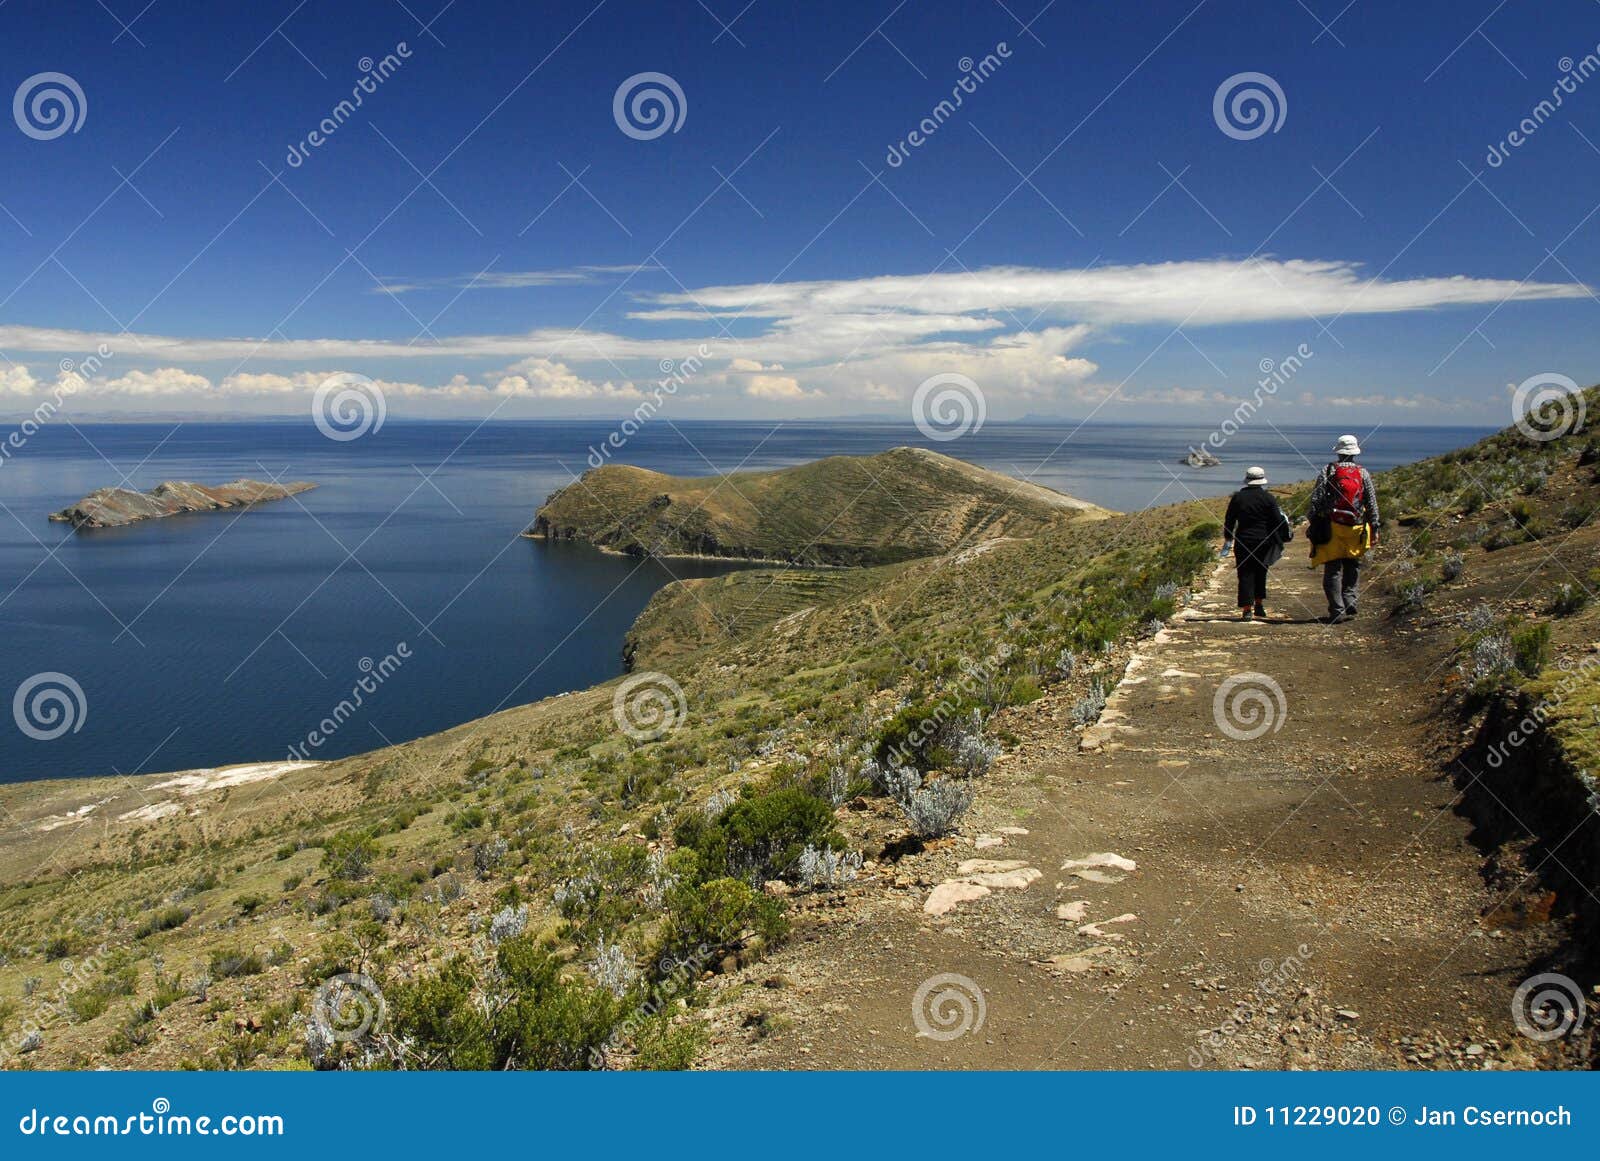 hikers on inca trail on isla del sol with titicaca